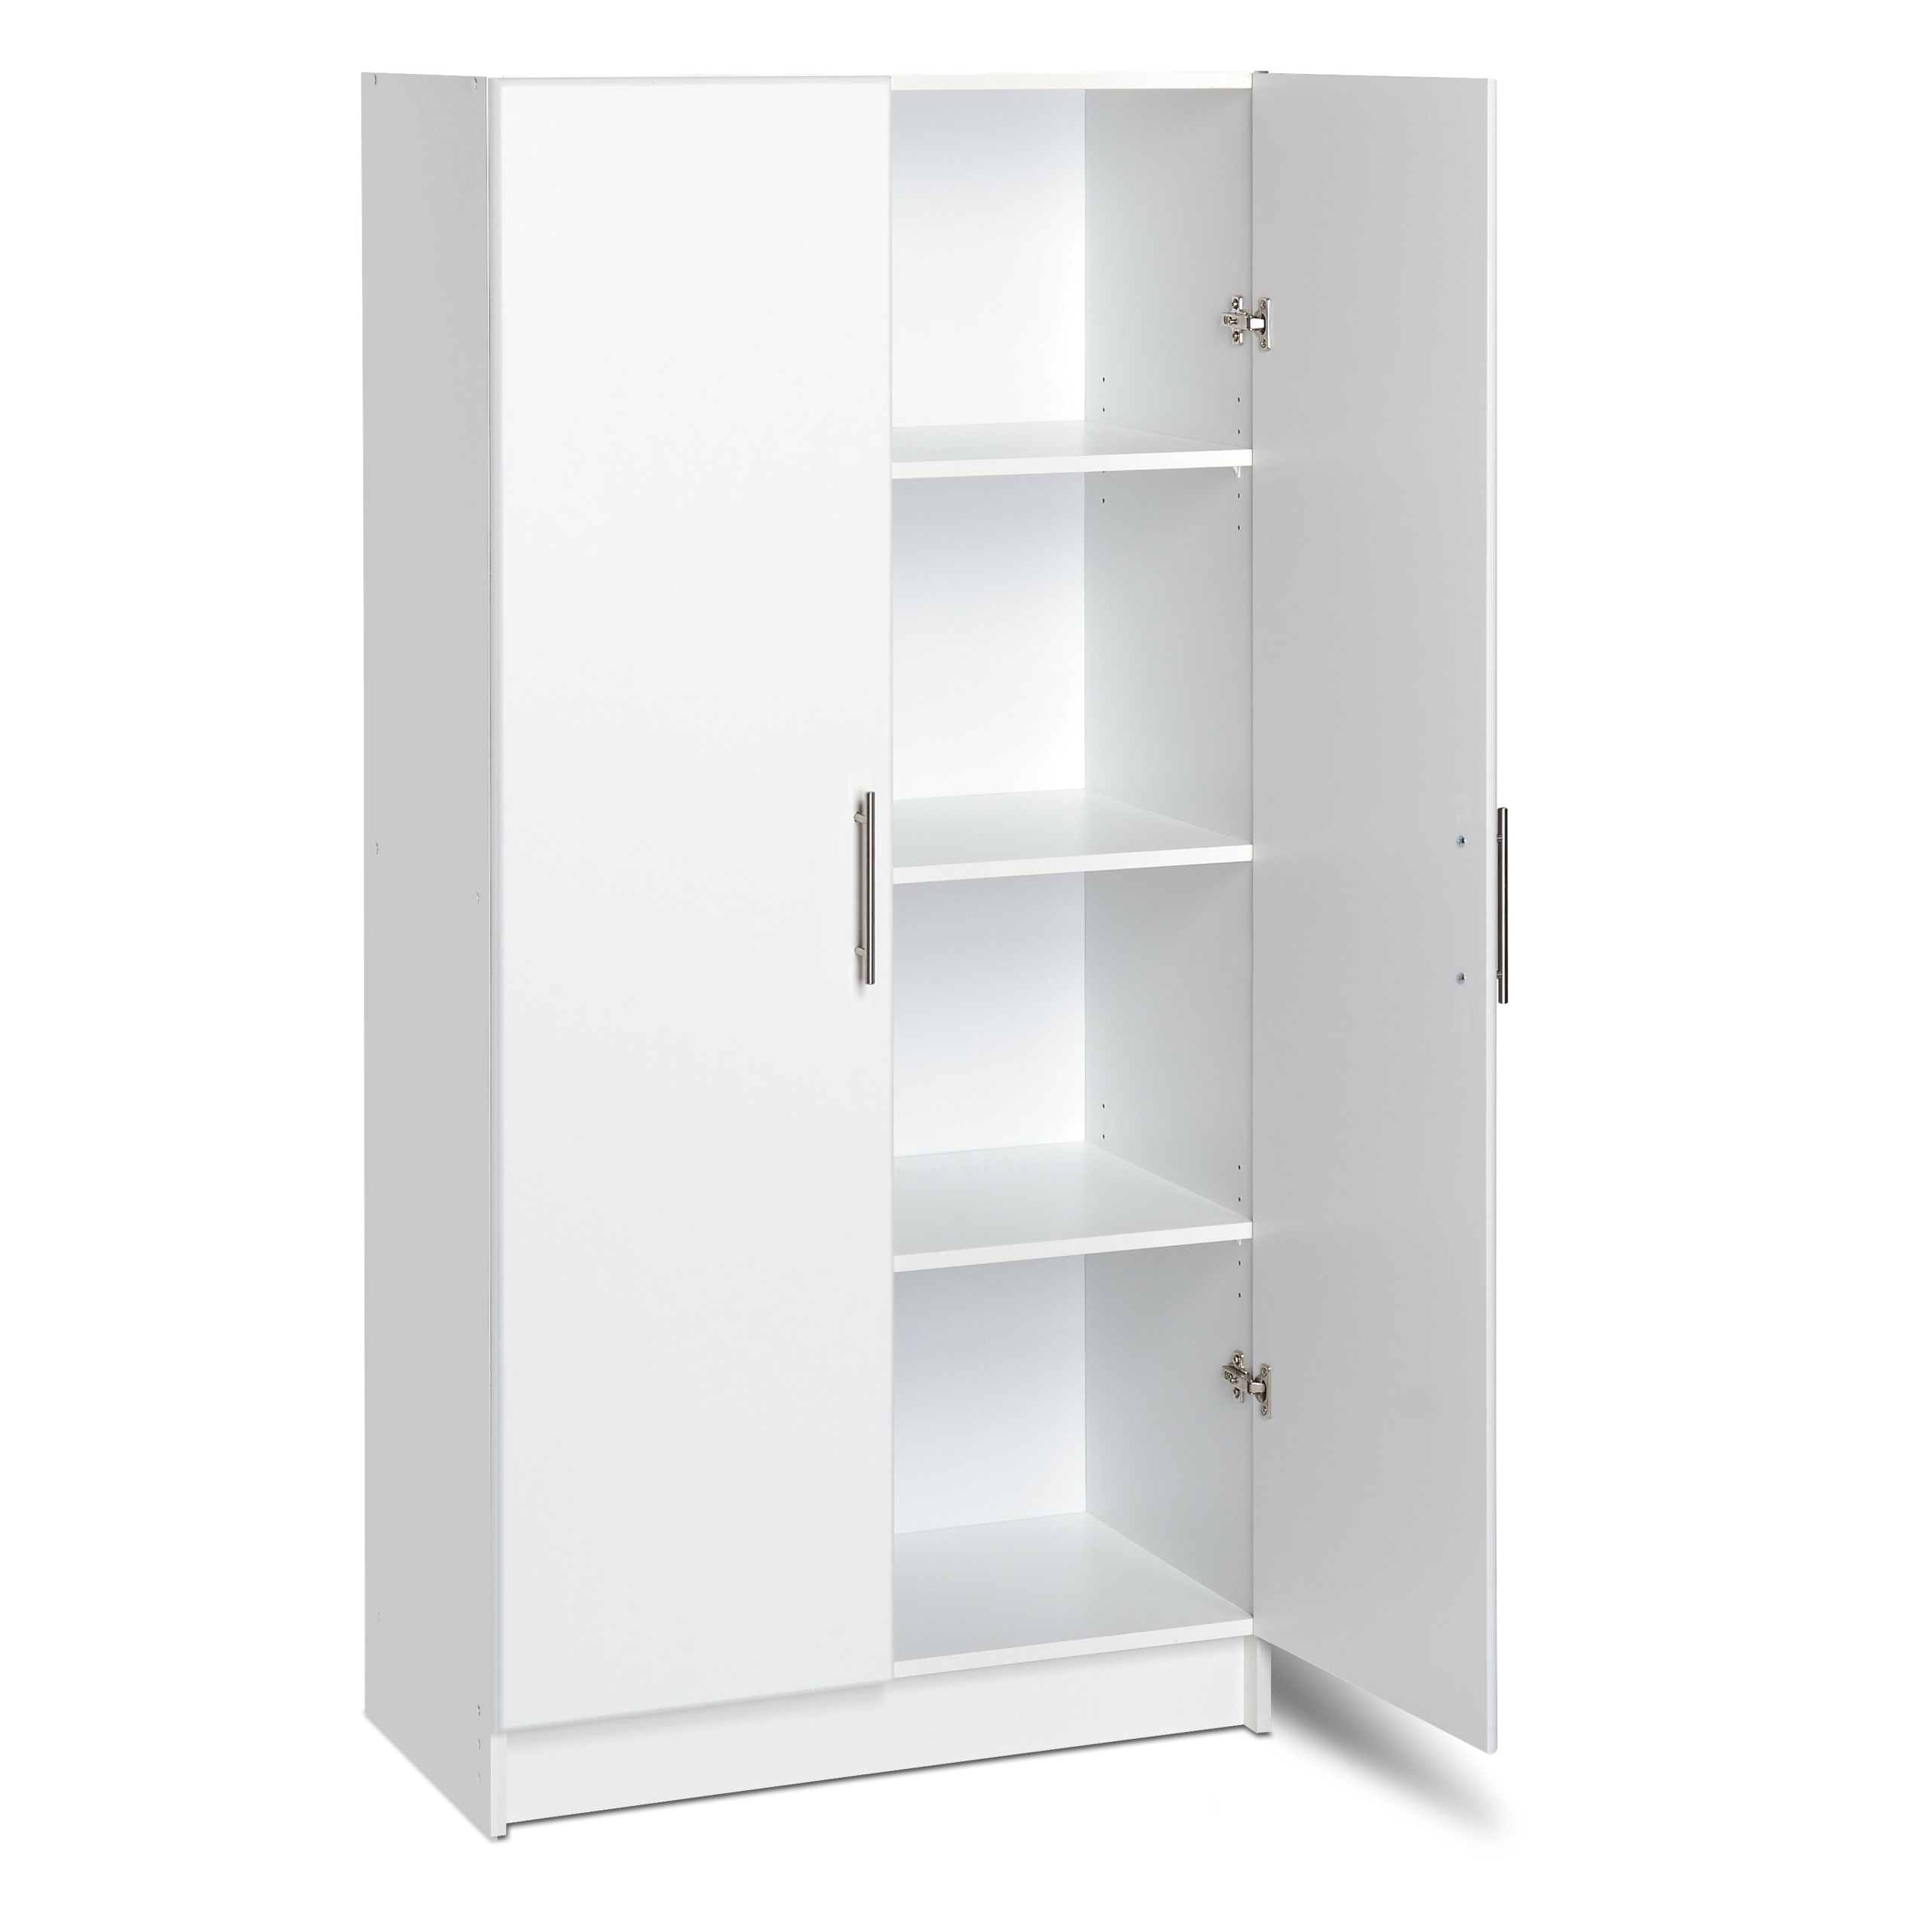 Storage Cabinets With Doors Visualhunt, Stand Alone Storage Shelves